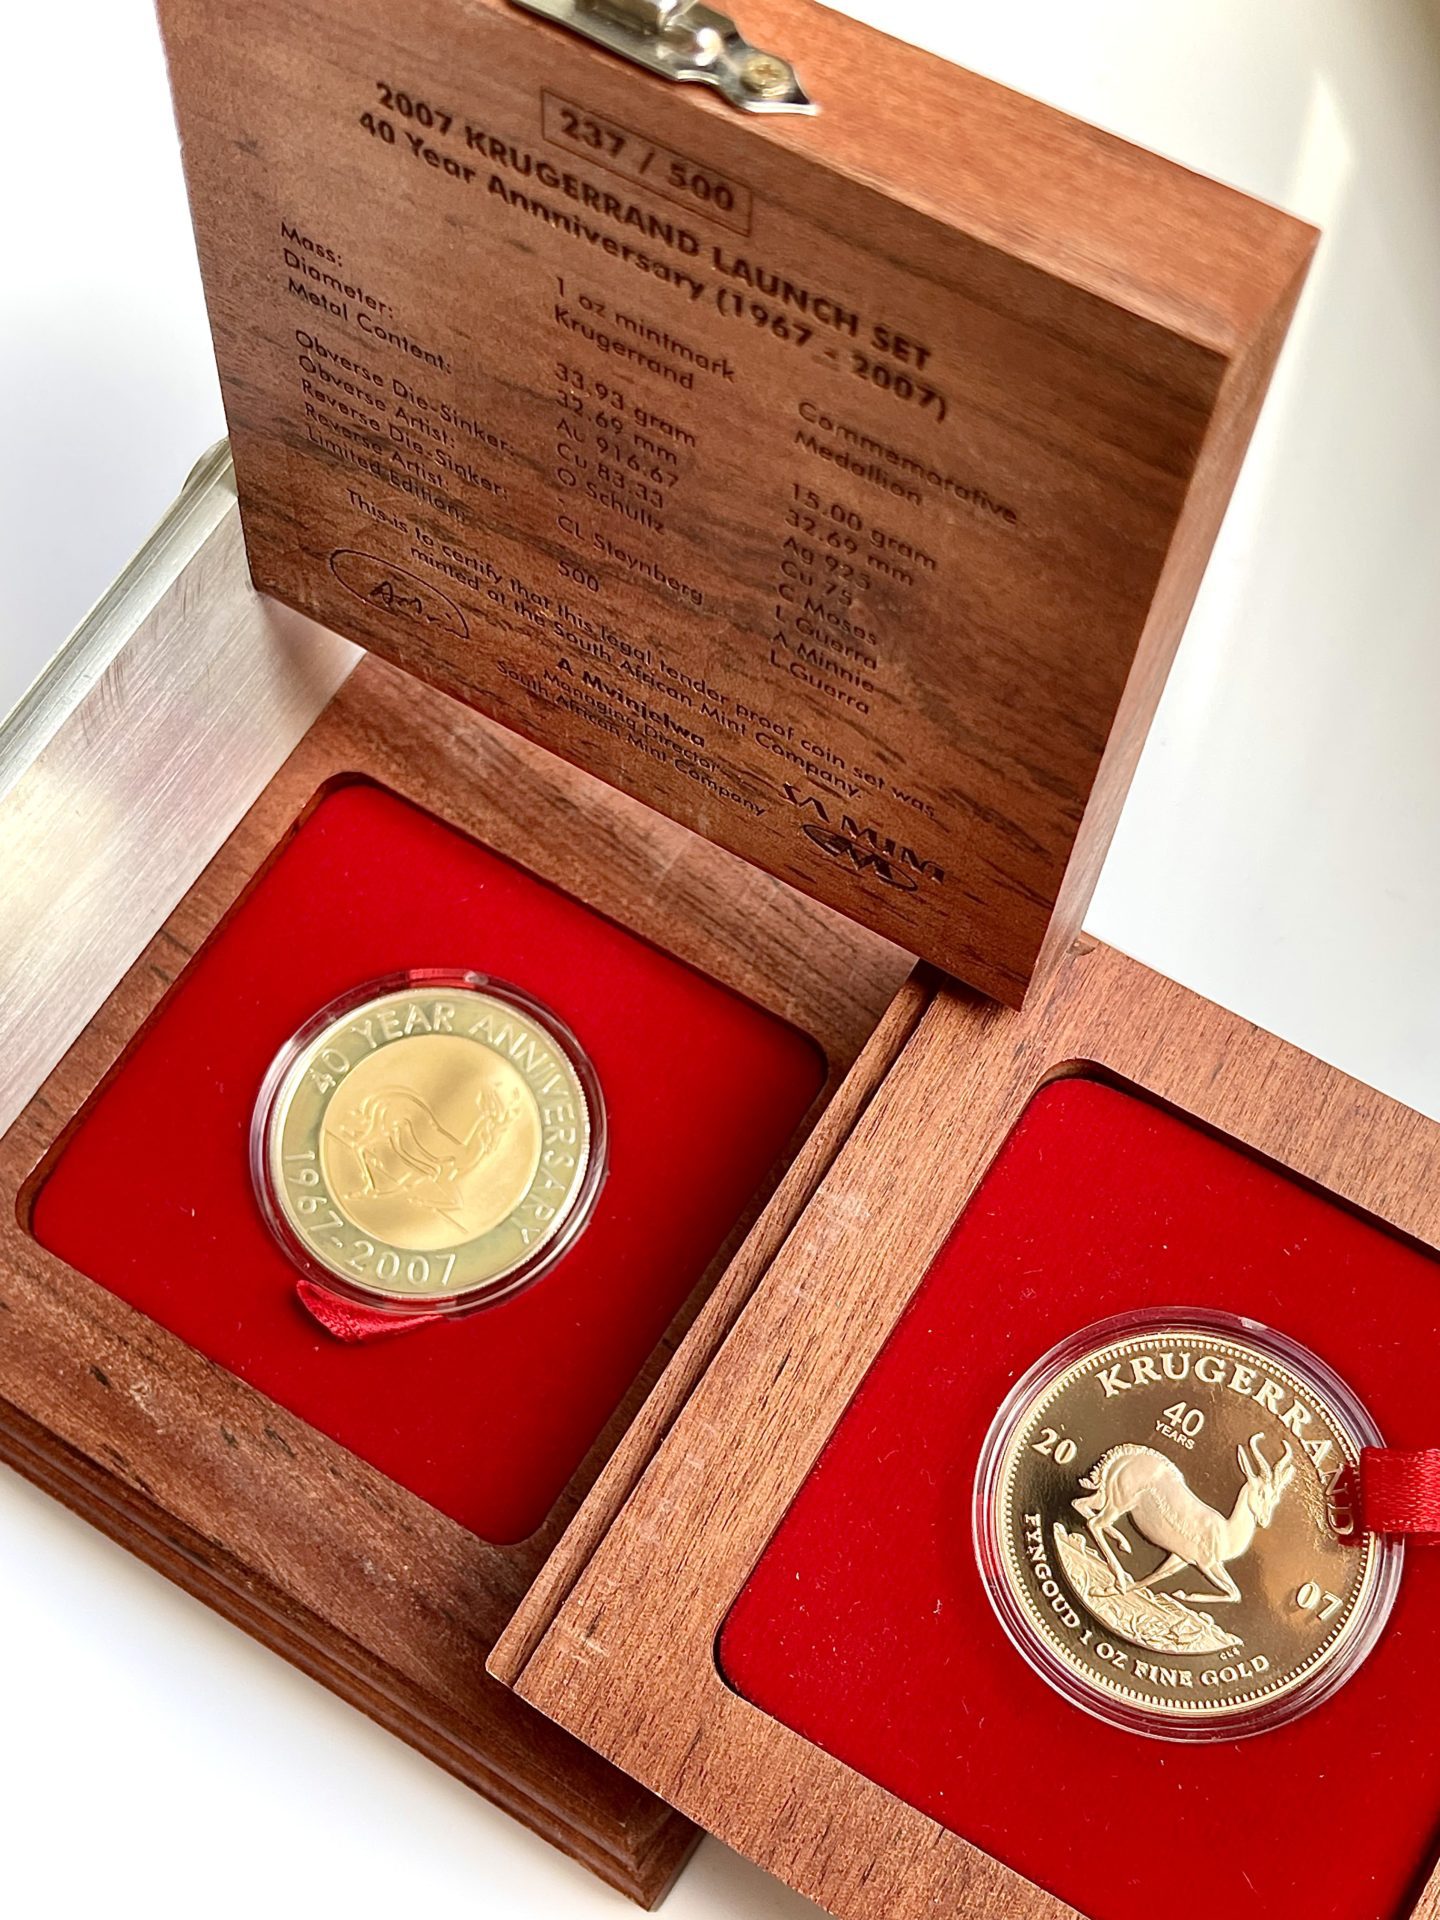 South Africa Krugerrand 2007 Mintmark 40 years anniversary